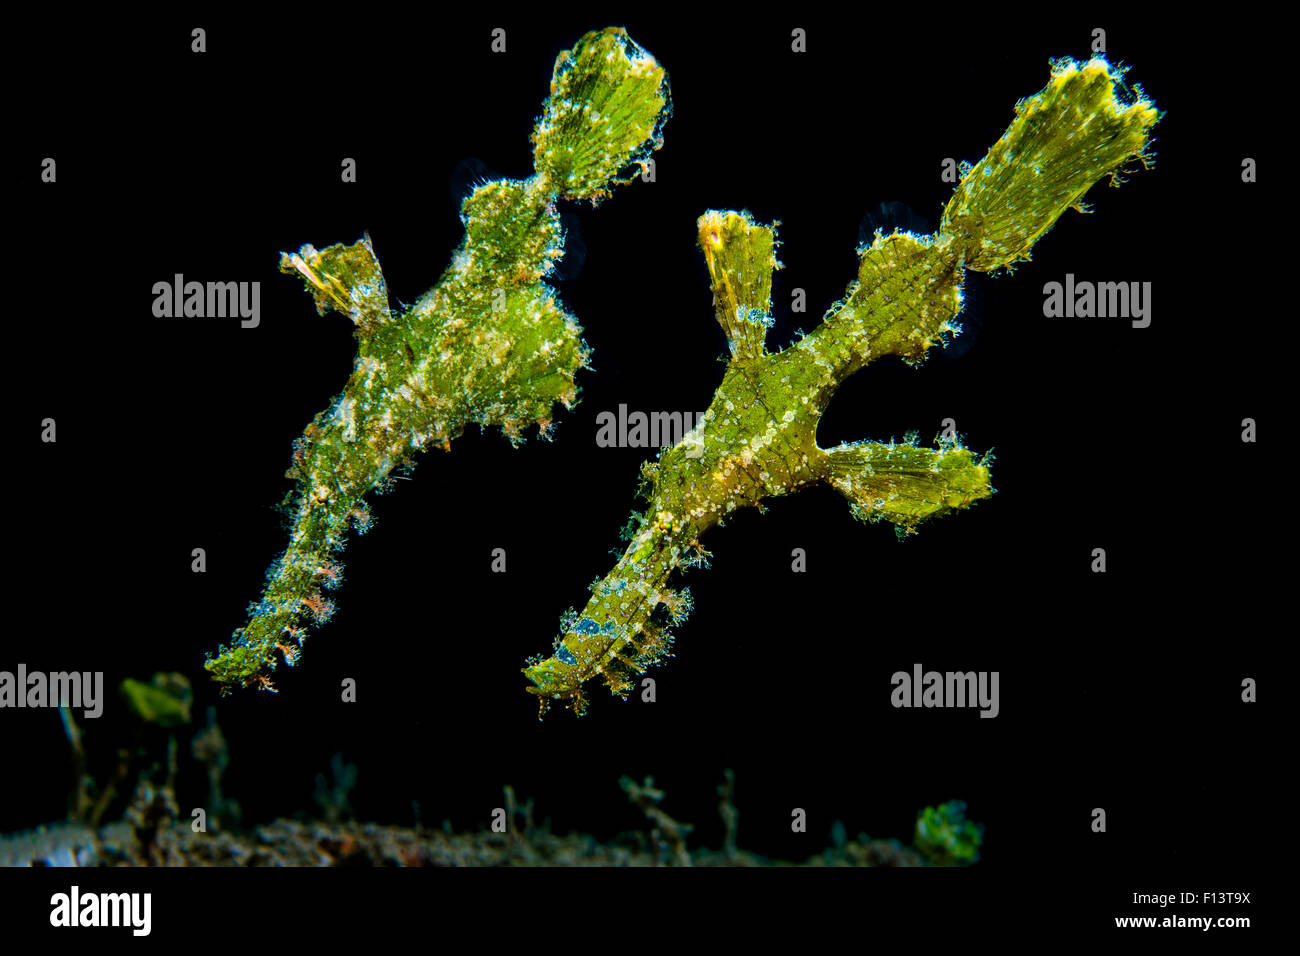 Pair of Rough snout ghostpipefish (Solenostomus paegnius), with female with egg pouch in front of male. Anilao, Batangas, Luzon, Philippines. Verde Island Passages, Tropical West Pacific Ocean. Stock Photo